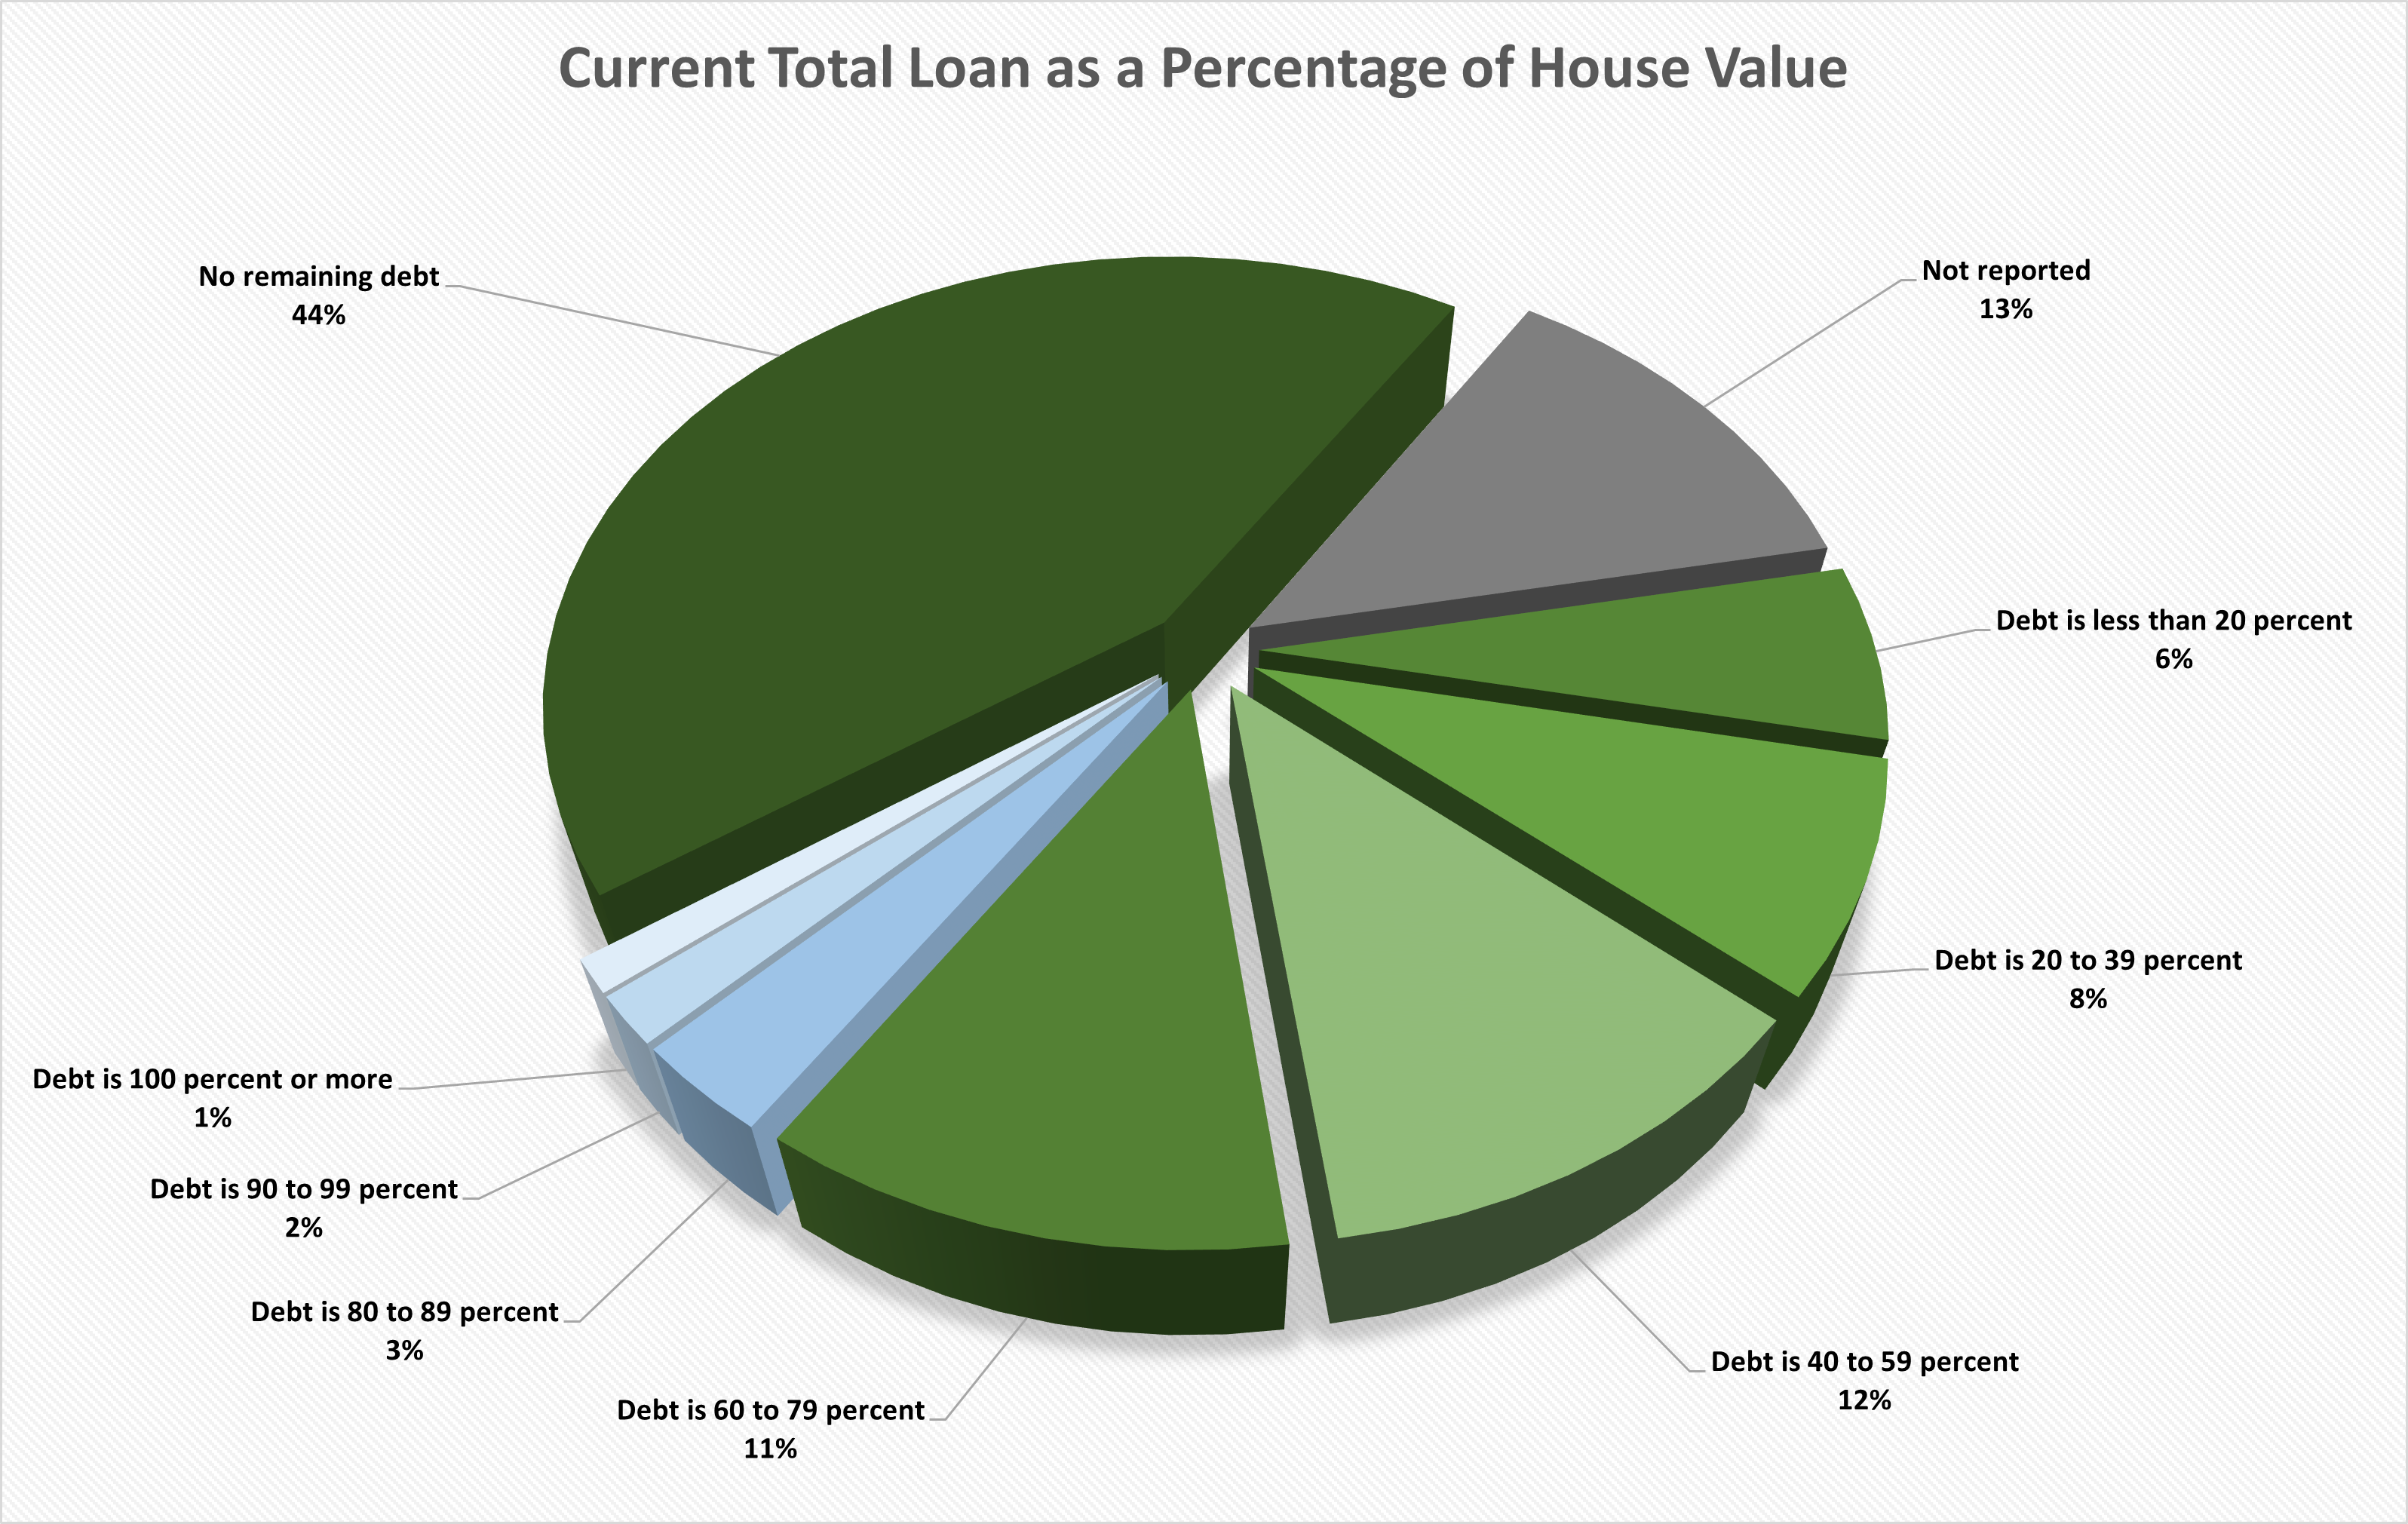 Current Total Loan as a Percentage of House Value